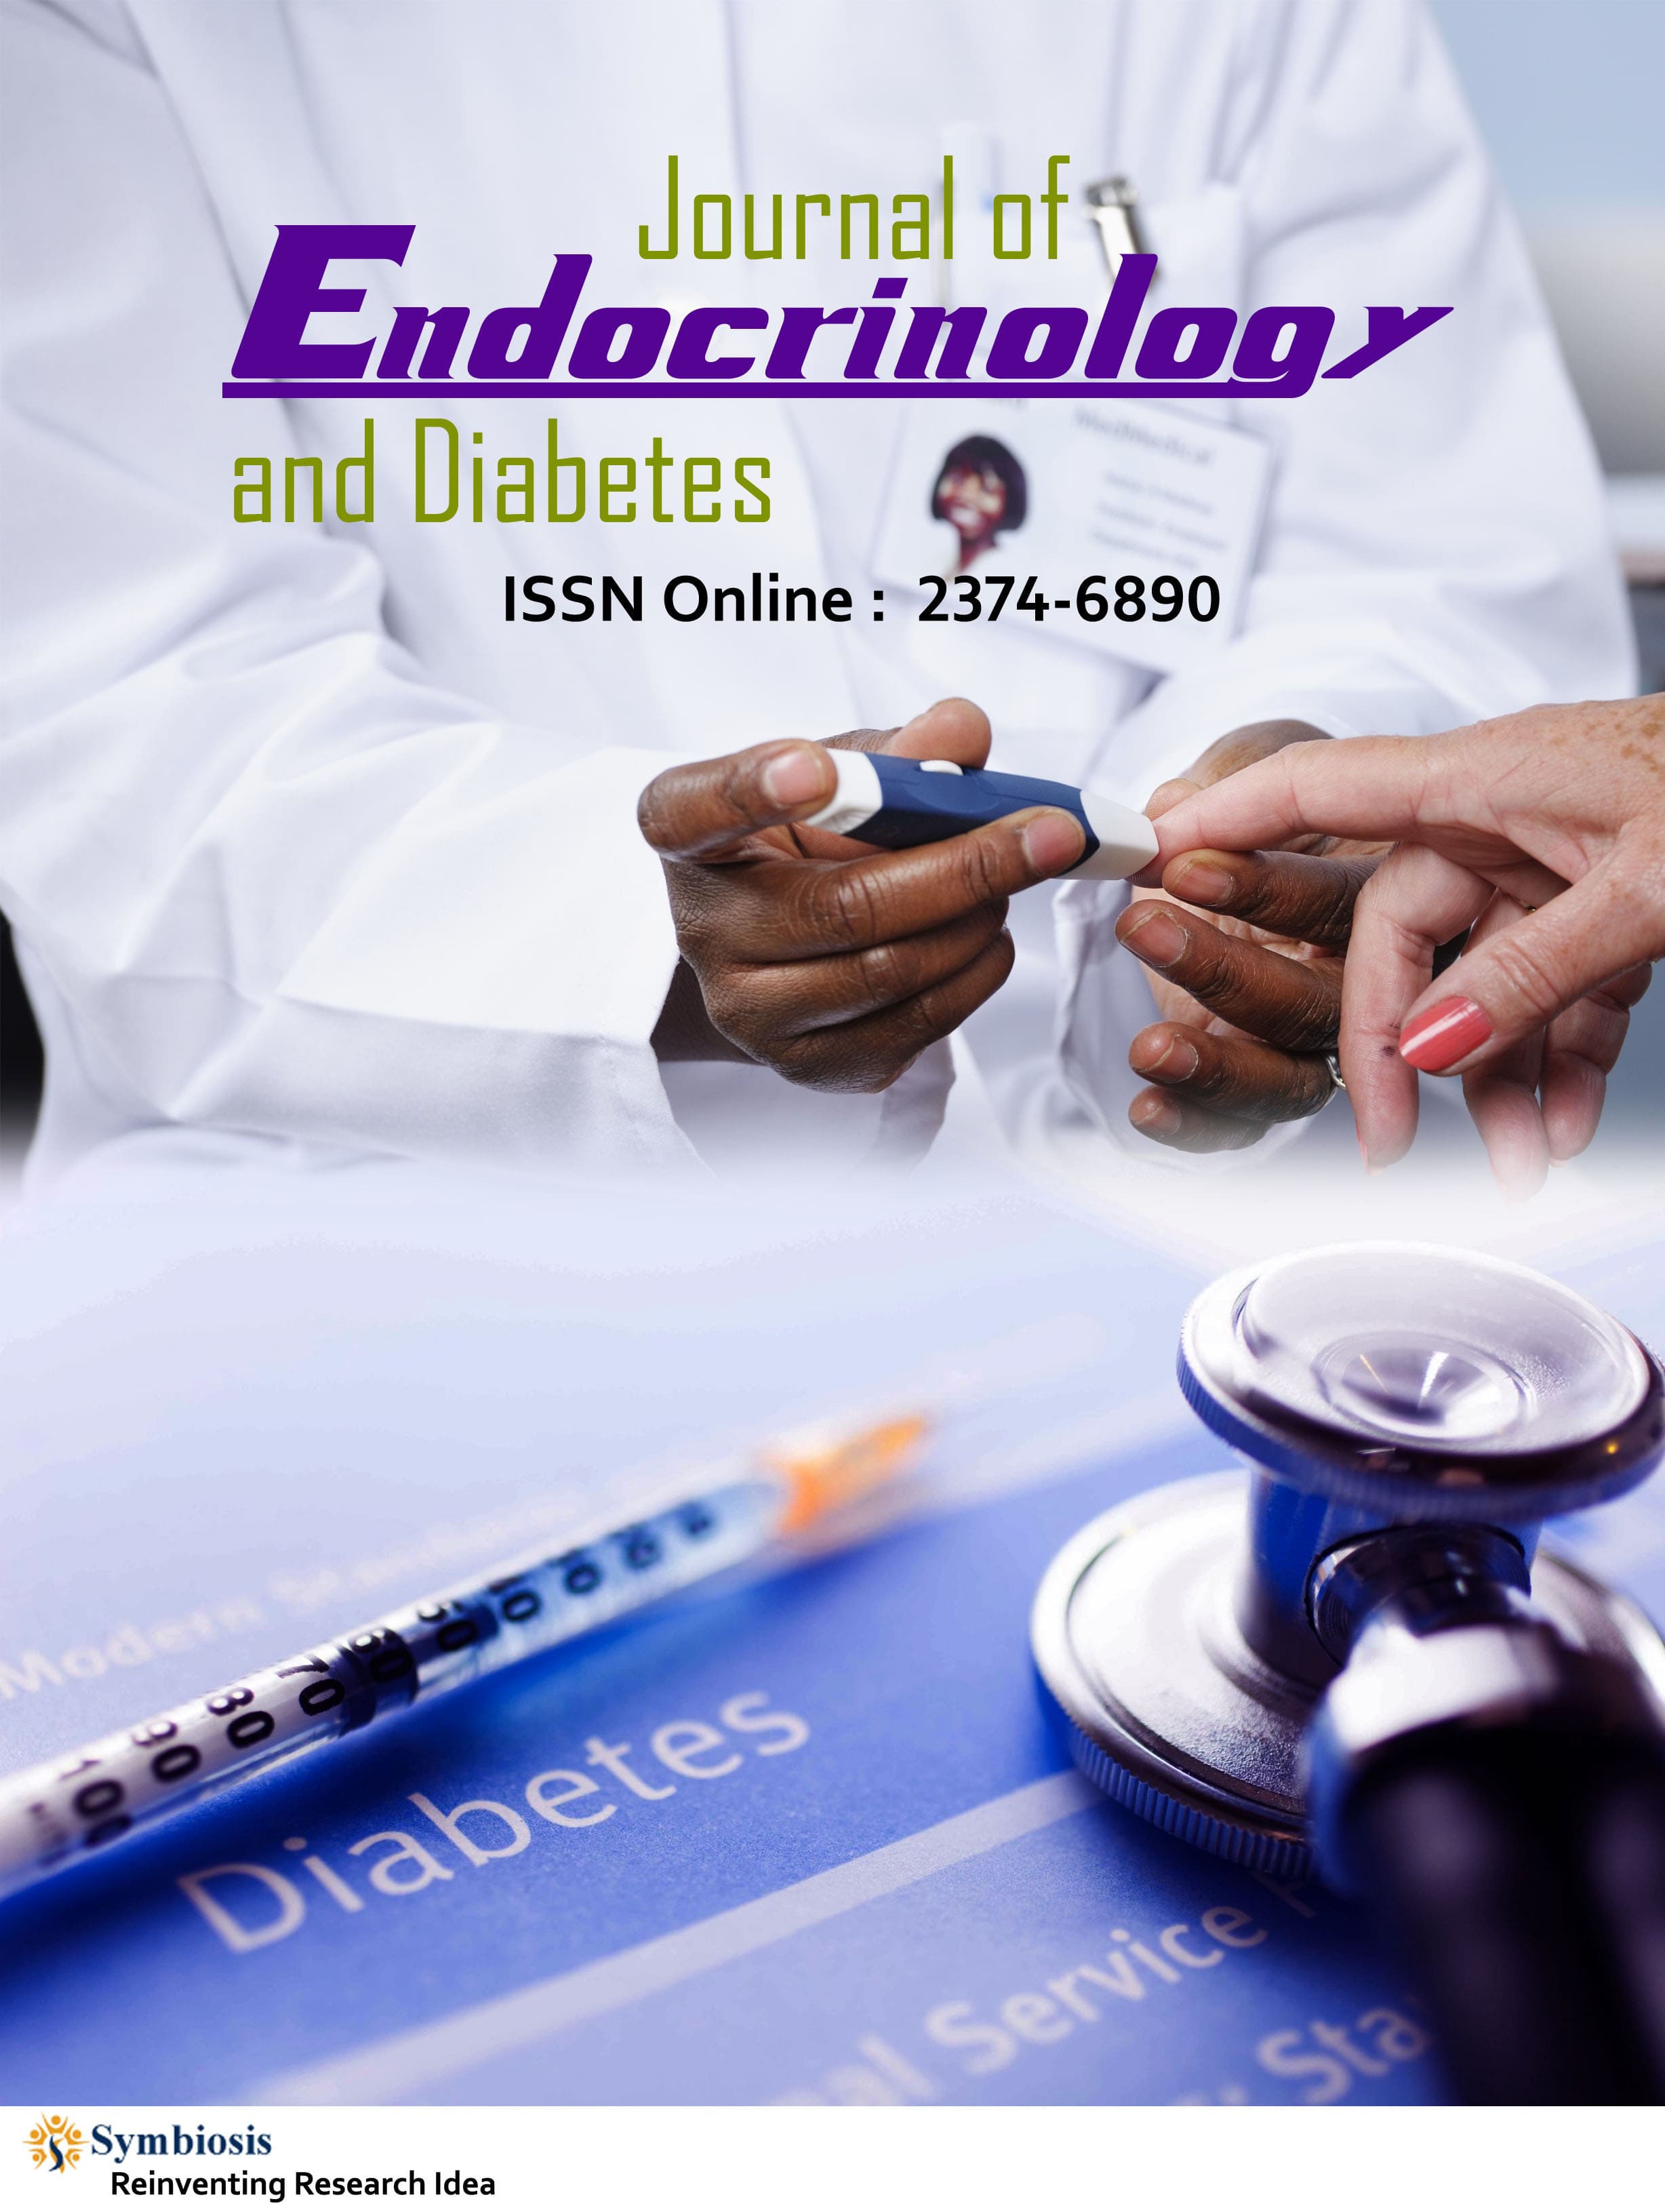 diabetes and endocrinology journal